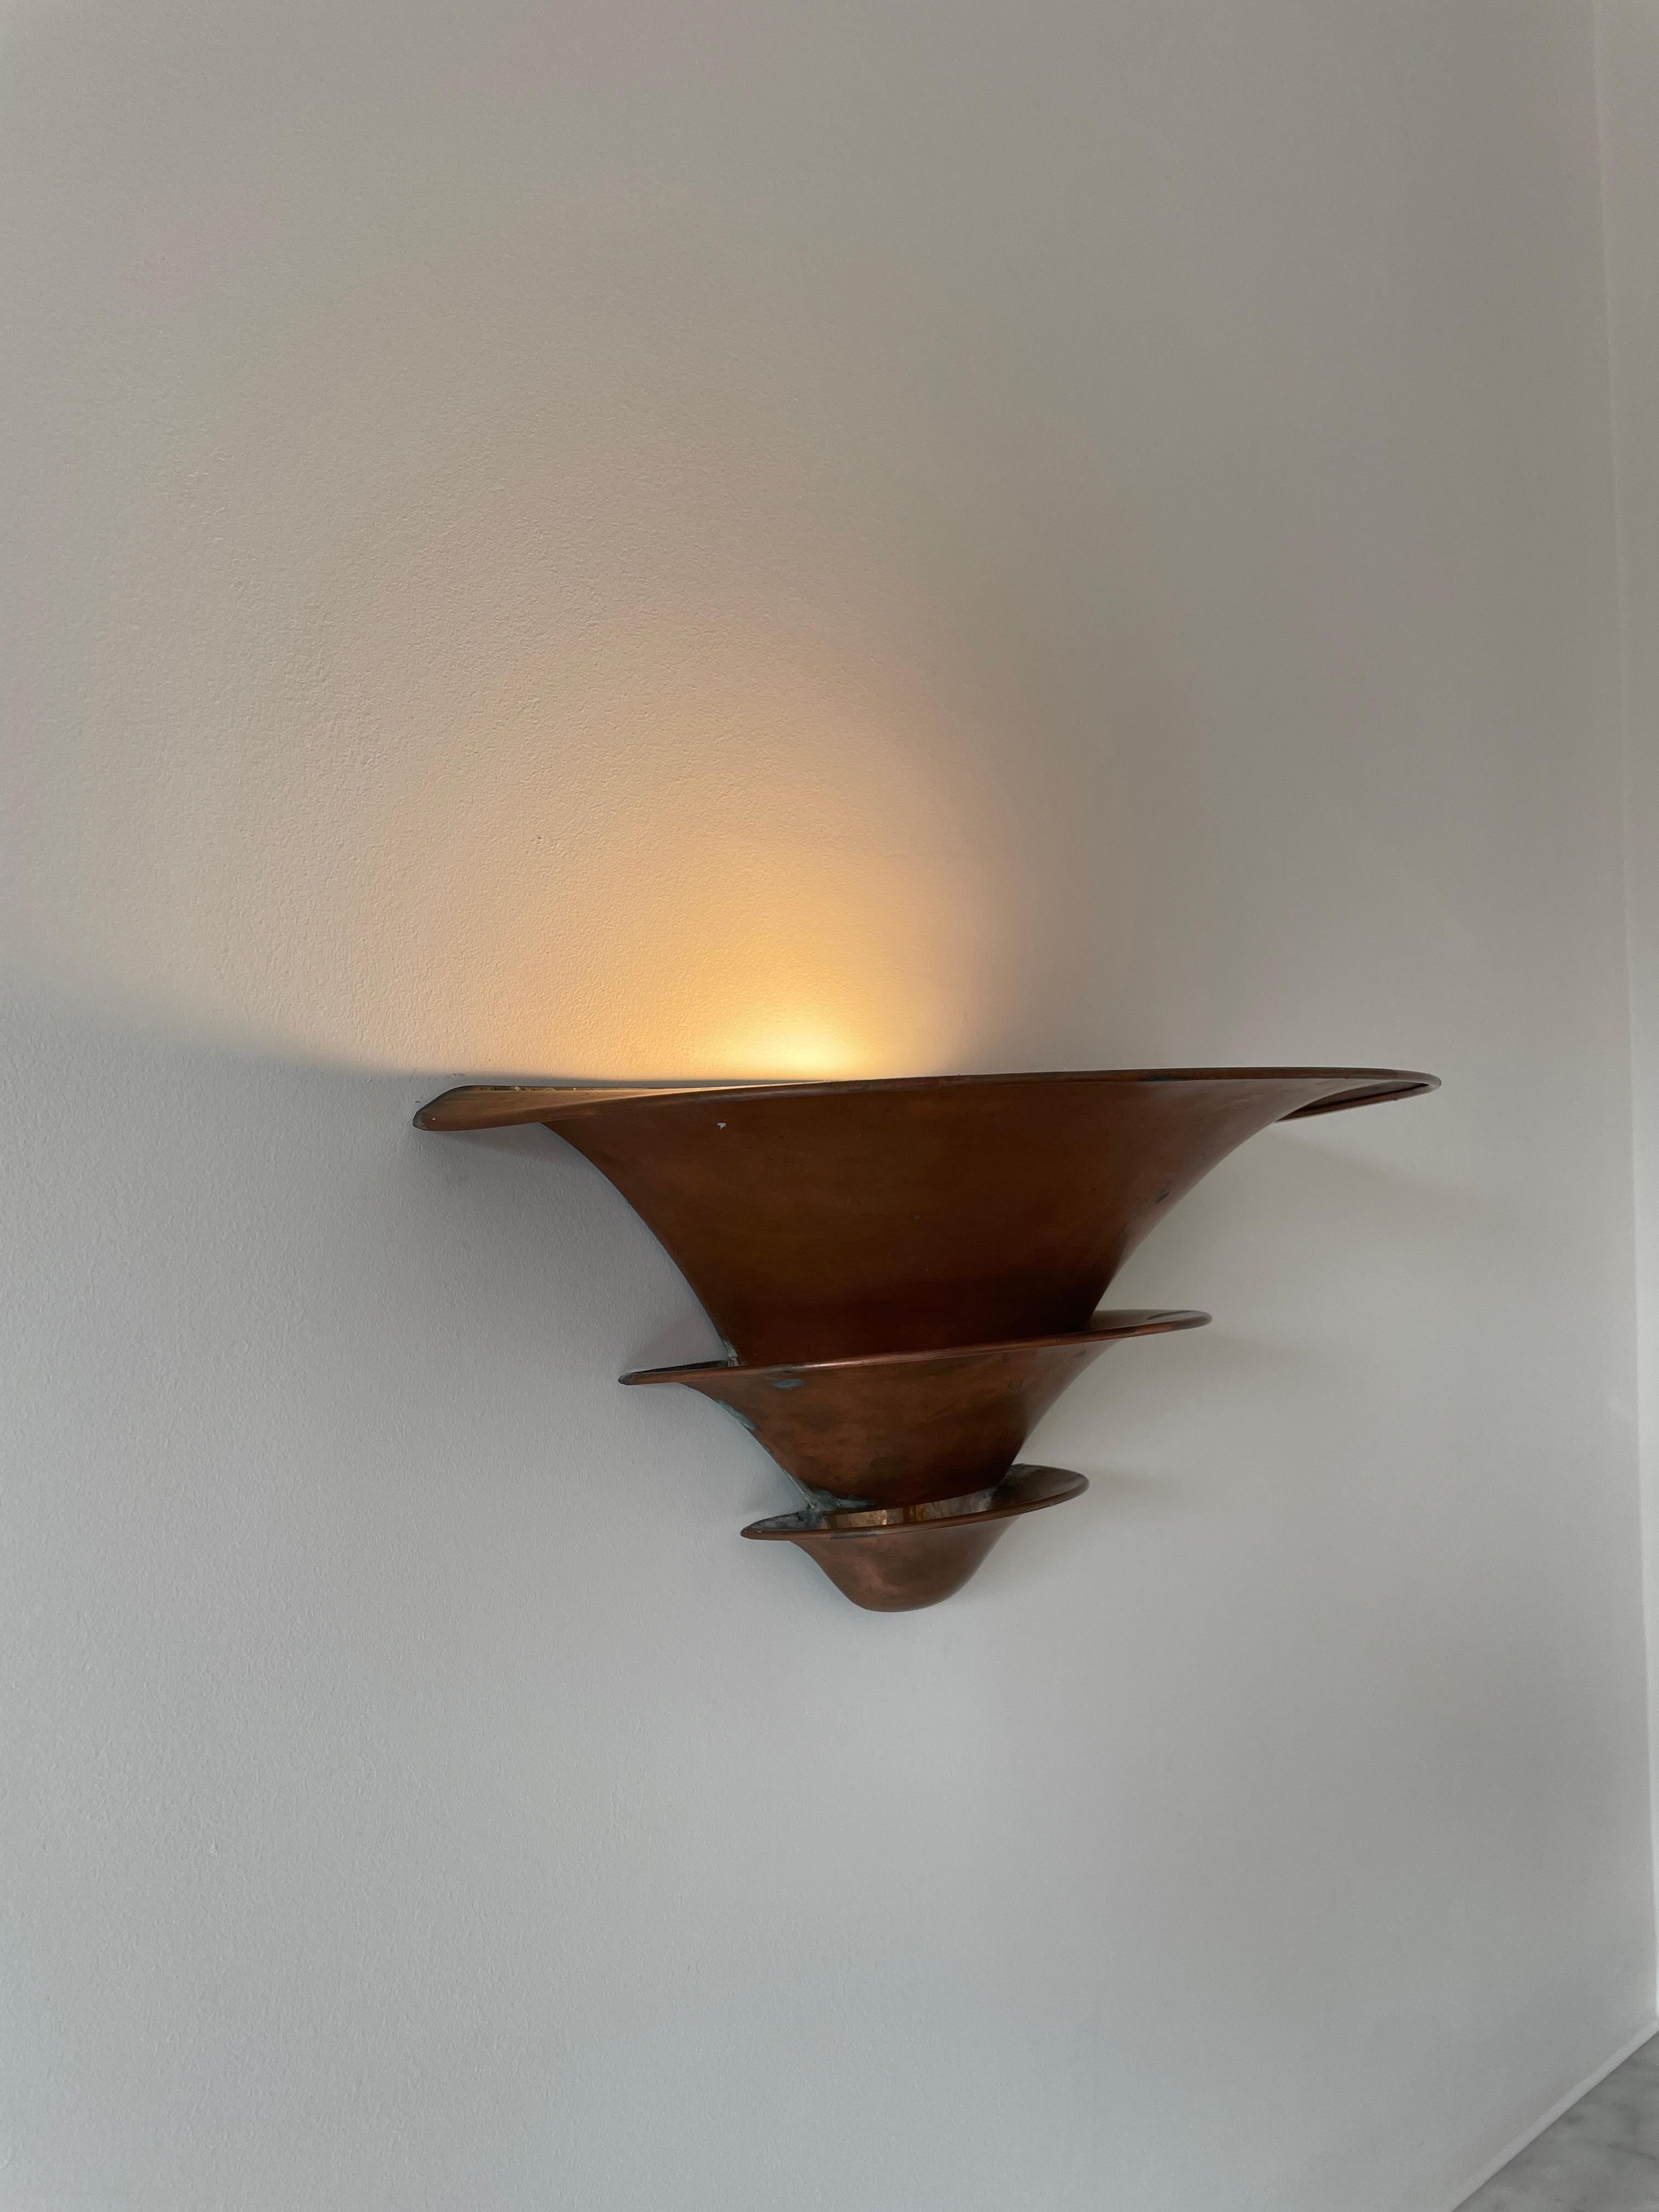 Height: 15cm
Width: 32cm

Designer: Louis Poulsen
Manufacturer: Louis Poulsen
Date: 1930s
Materials: Copper

Description: Copper wall lights from the 1930s. Light emits from each leaf of the design, creating a lovely cascade of light across the